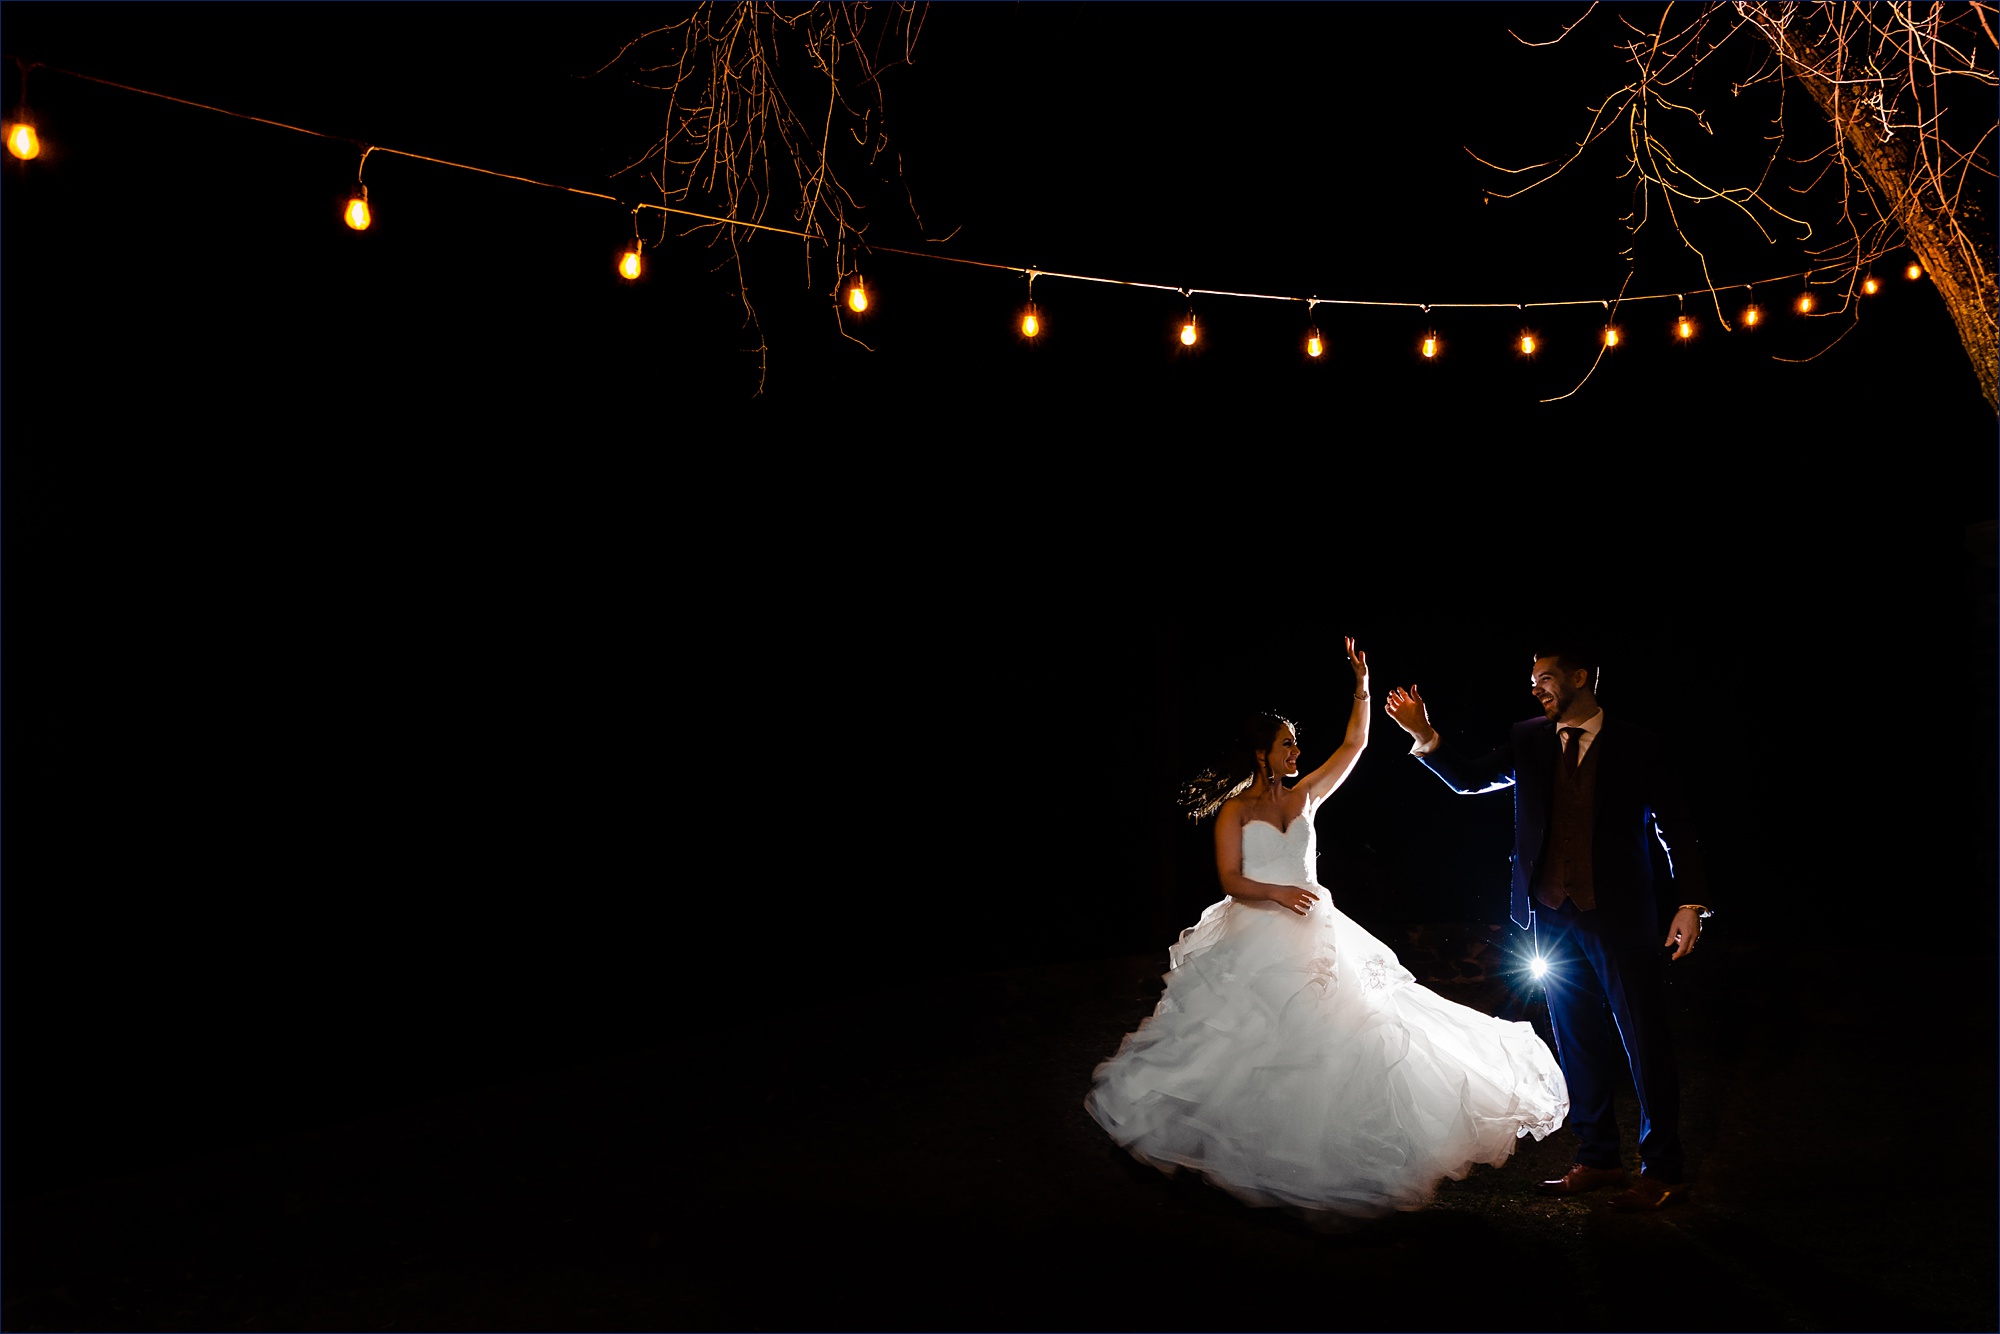 The groom gives the bride a spin on their wedding day under the twinkle lights